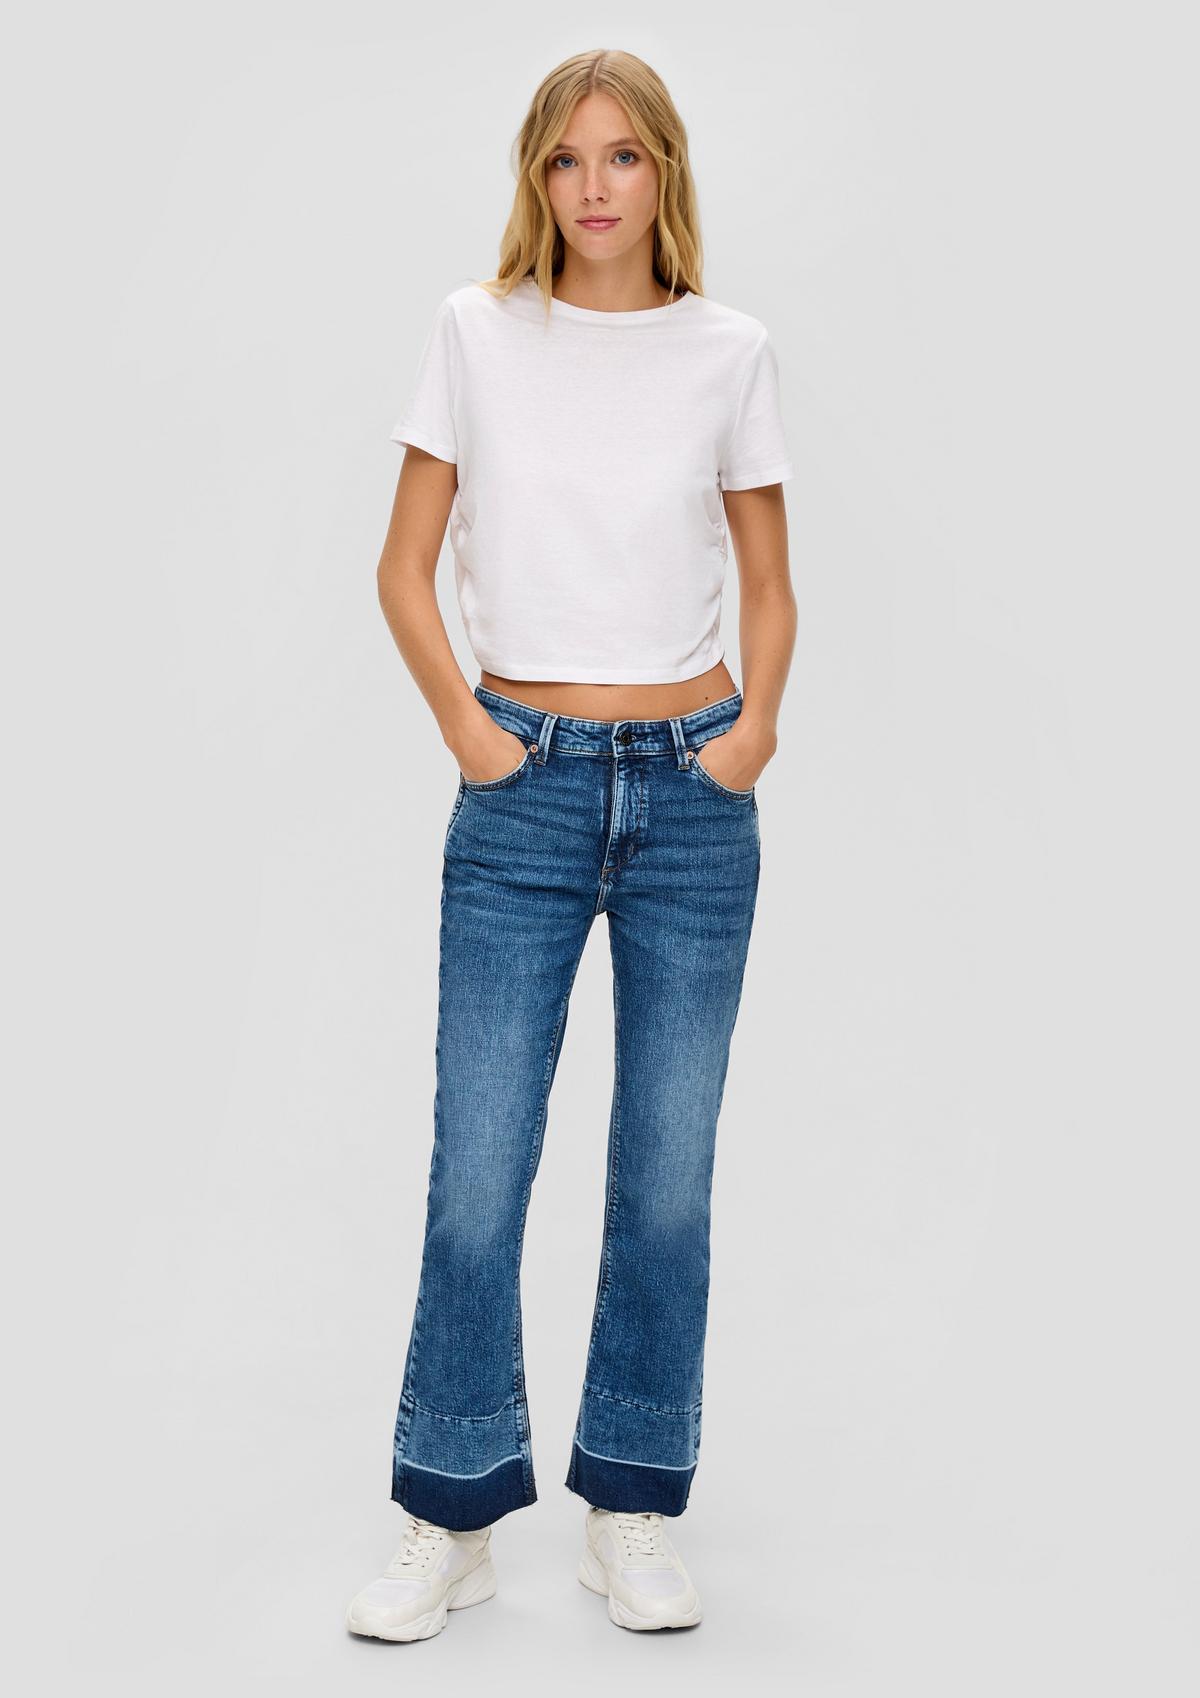 s.Oliver Reena cropped jeans / Slim fit / High rise / Flared leg